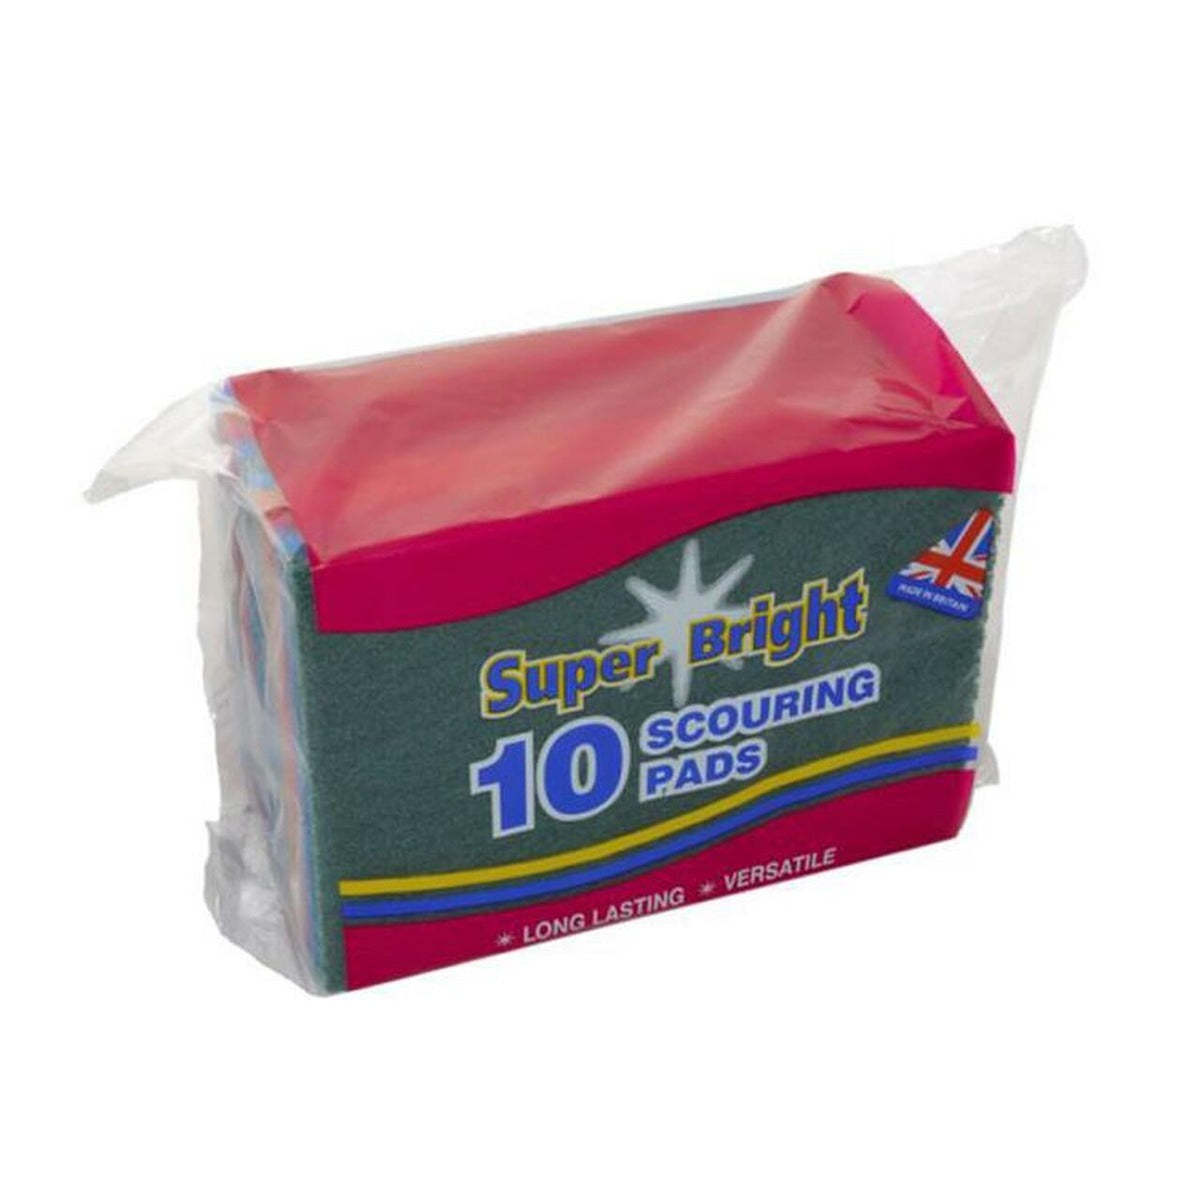 Super Bright - Scouring Pads - 10 Pack - Continental Food Store